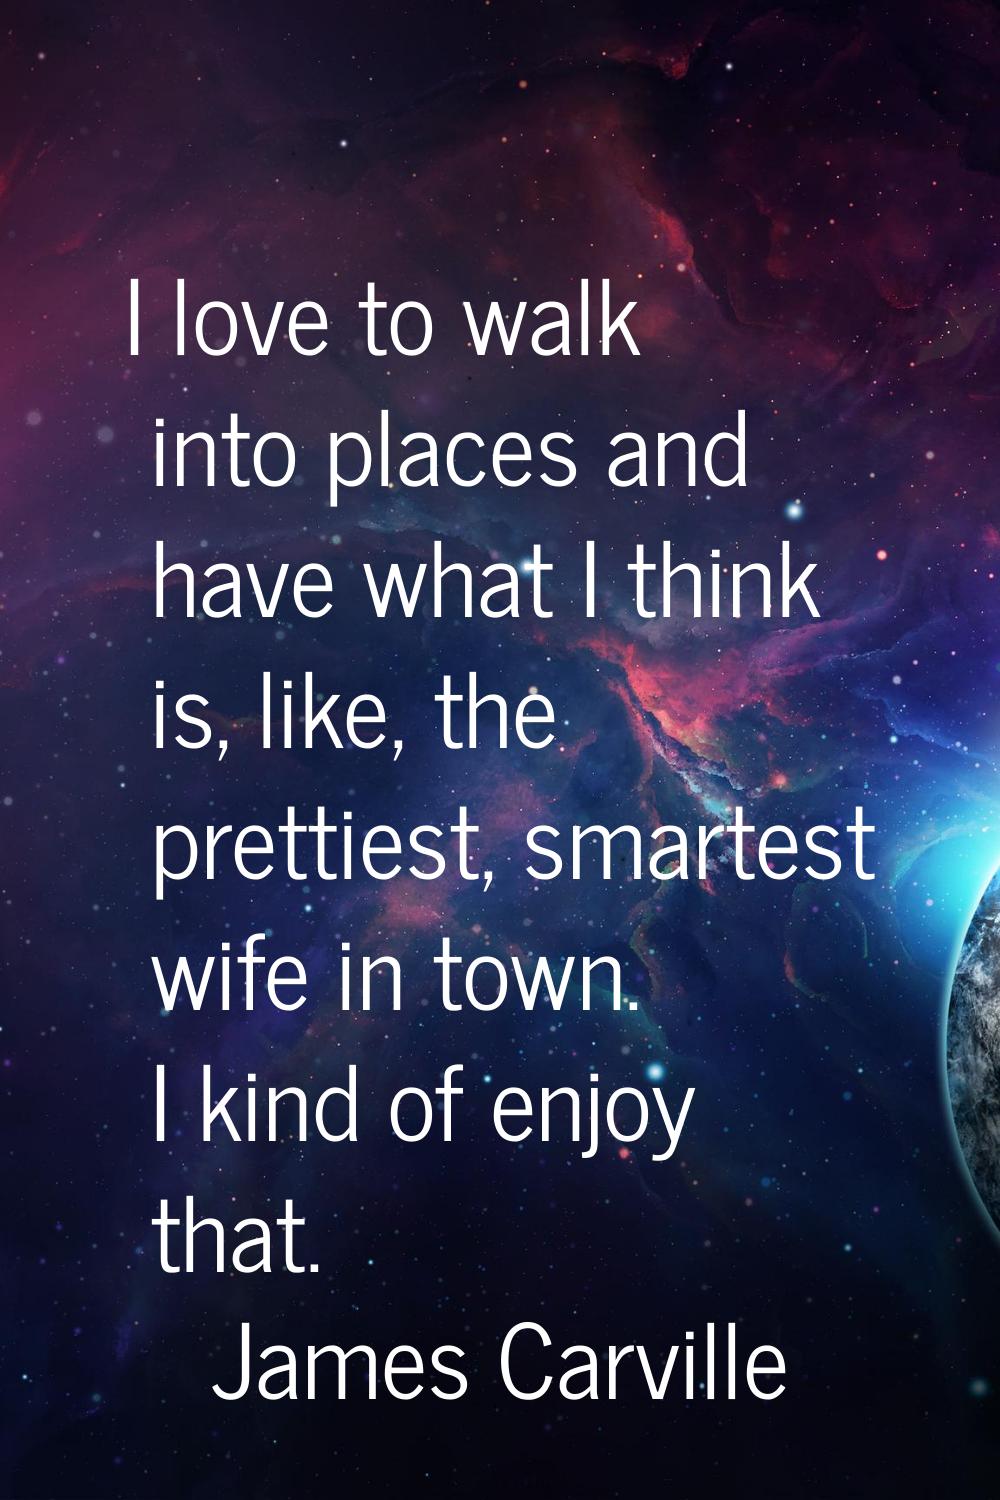 I love to walk into places and have what I think is, like, the prettiest, smartest wife in town. I 